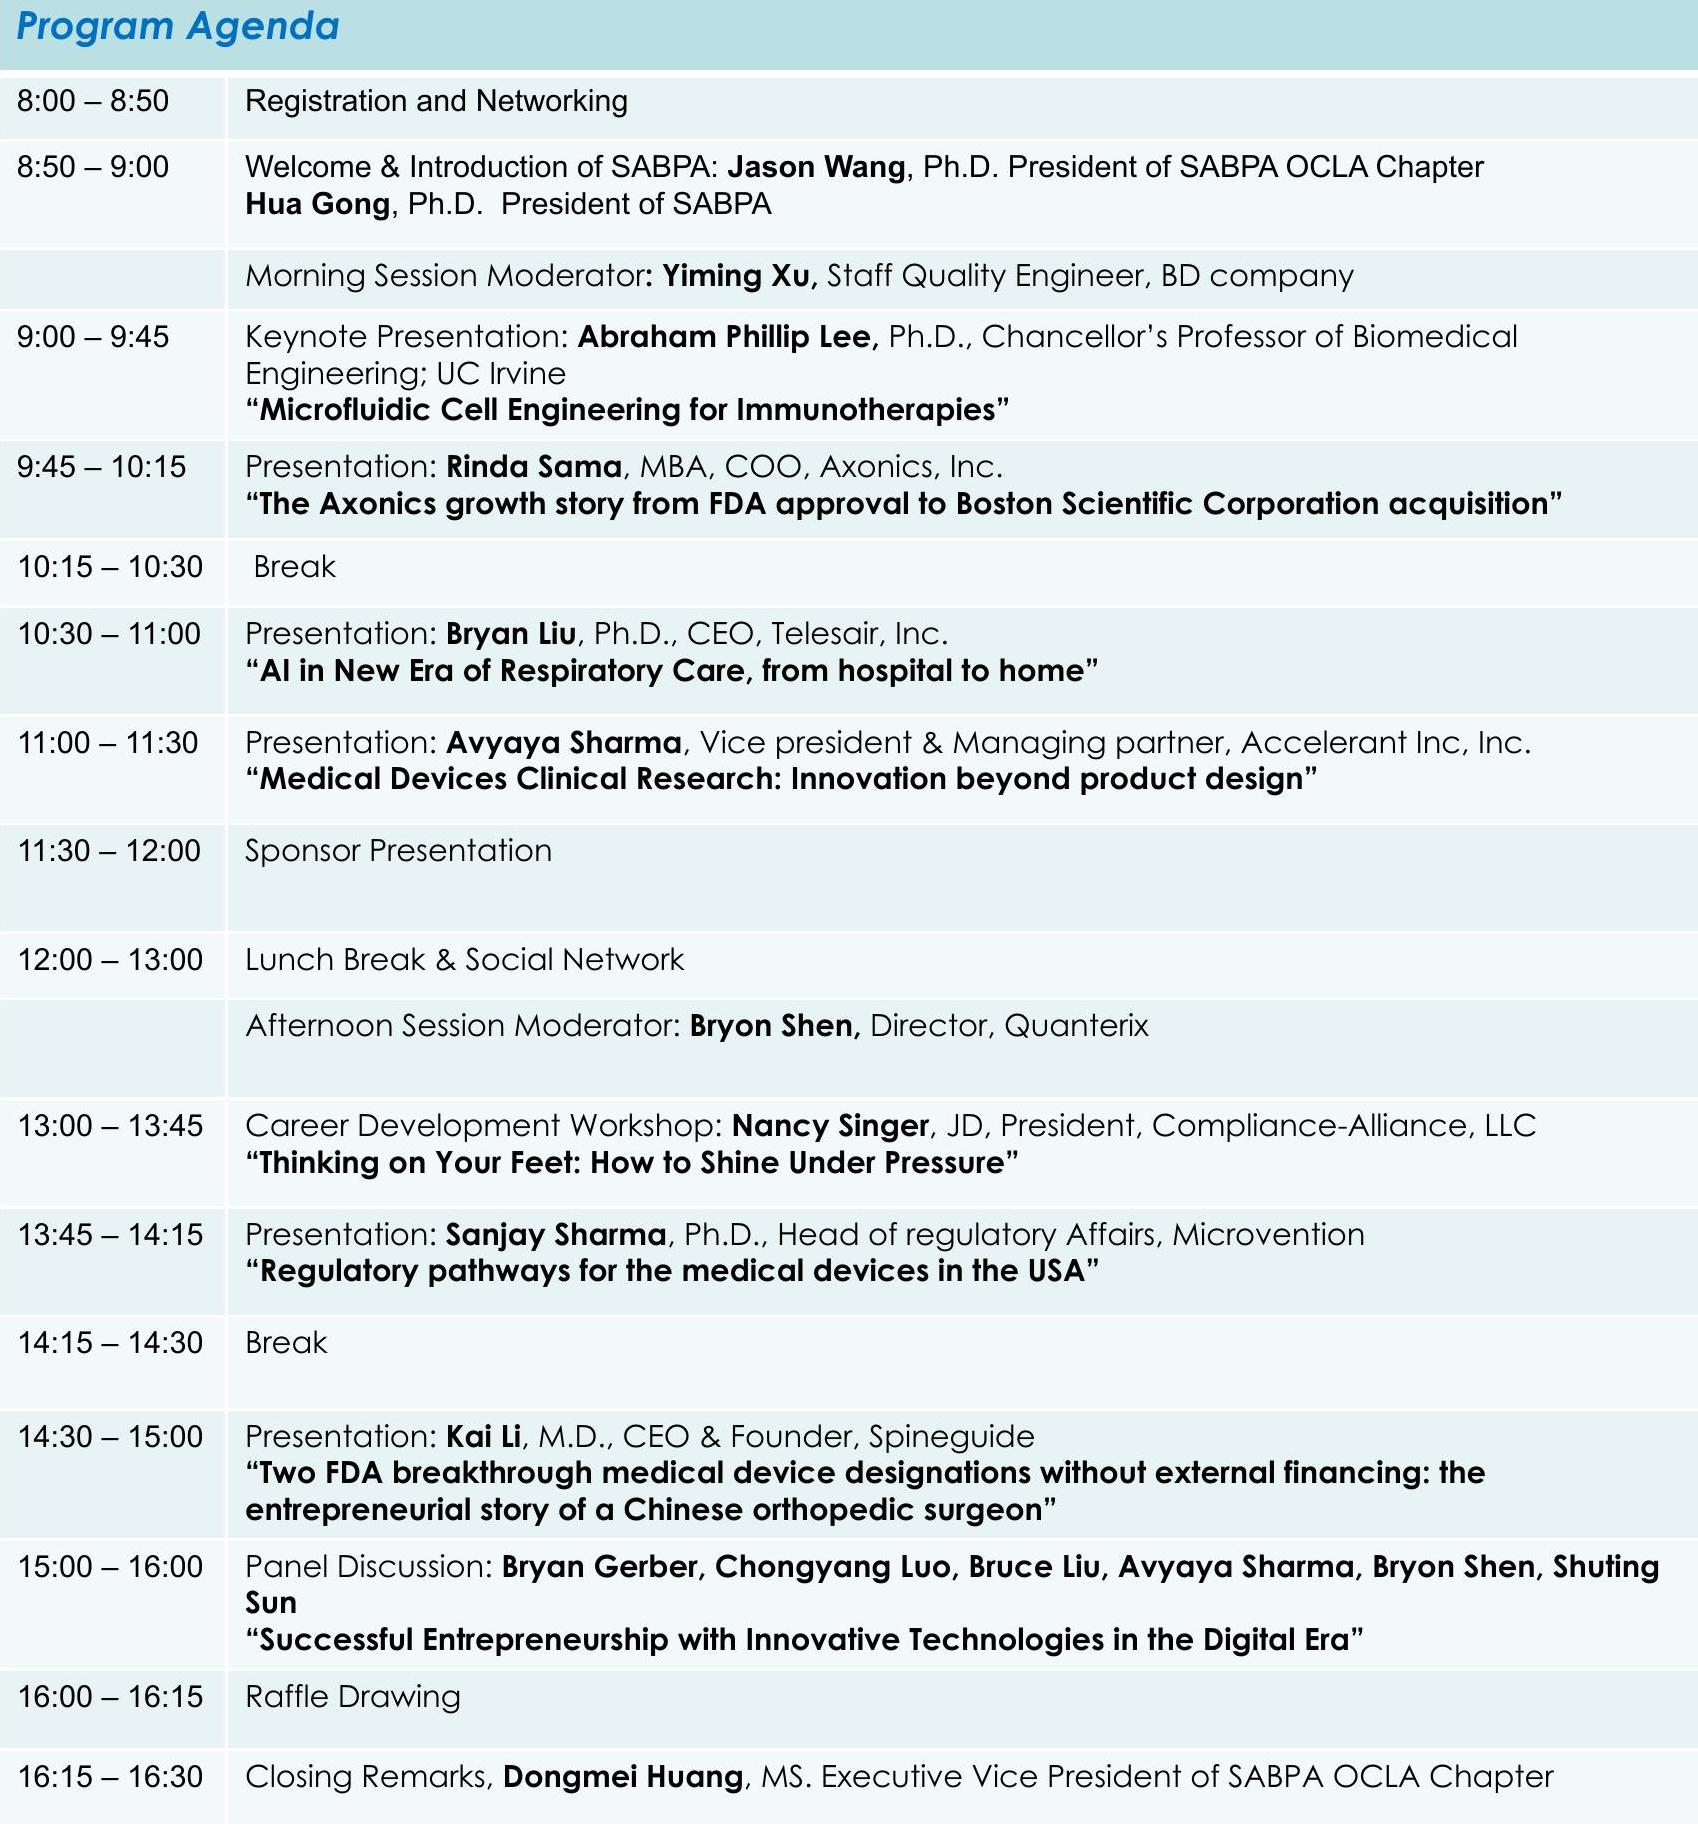 Image of the program agenda for the 16th Annual Biomedical Forum showcasing sessions, speakers, and topics scheduled for the event.